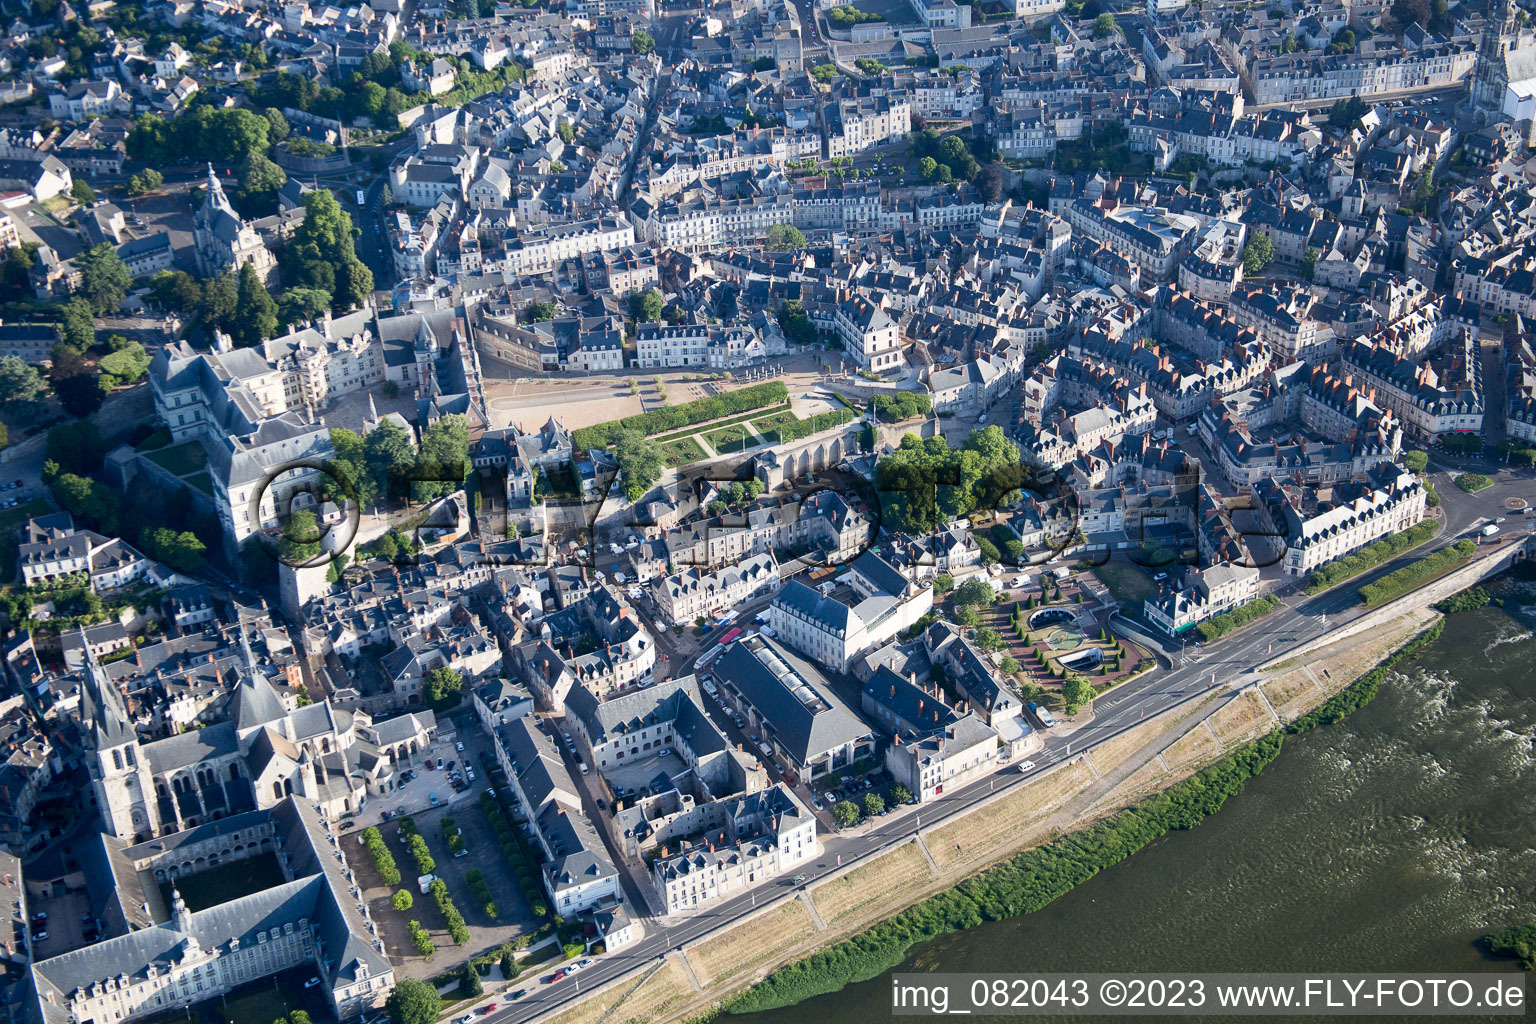 Drone image of Blois in the state Loir et Cher, France